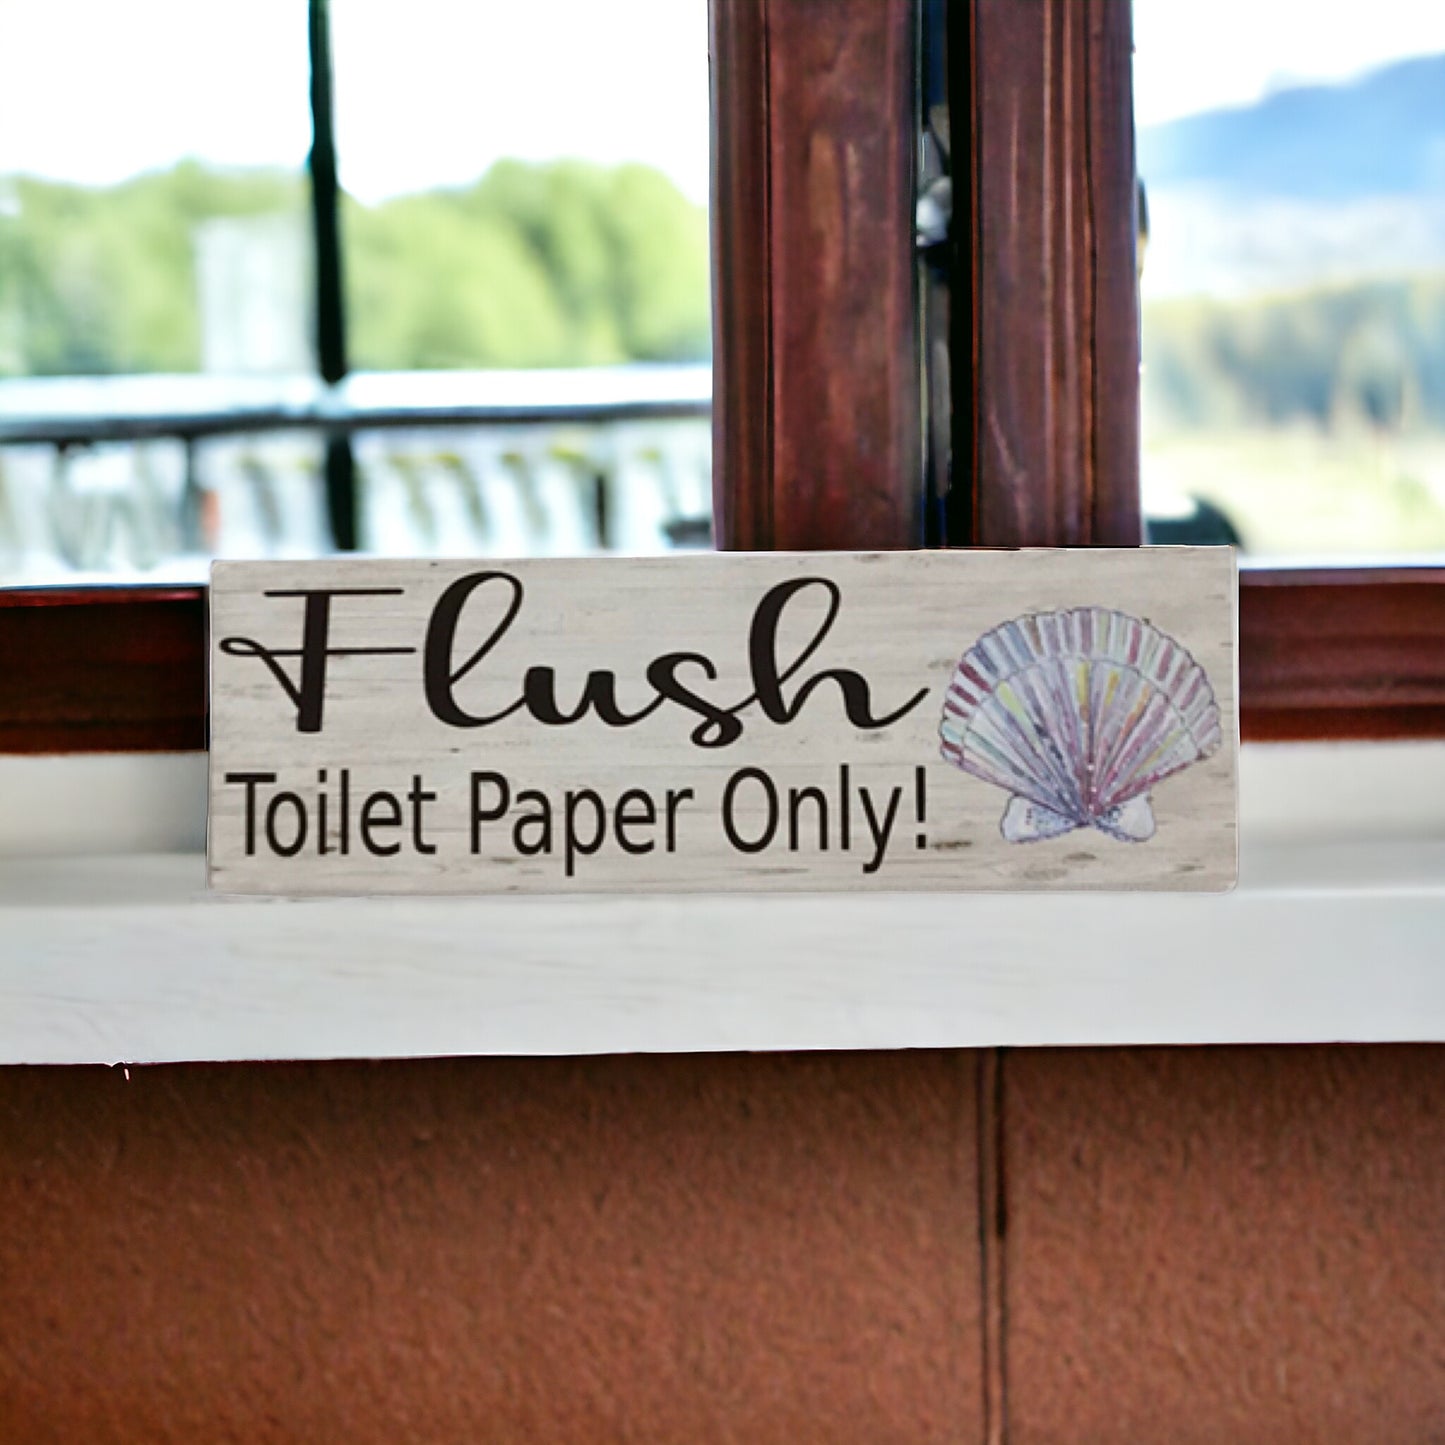 Toilet Paper Only Shell Sign - The Renmy Store Homewares & Gifts 